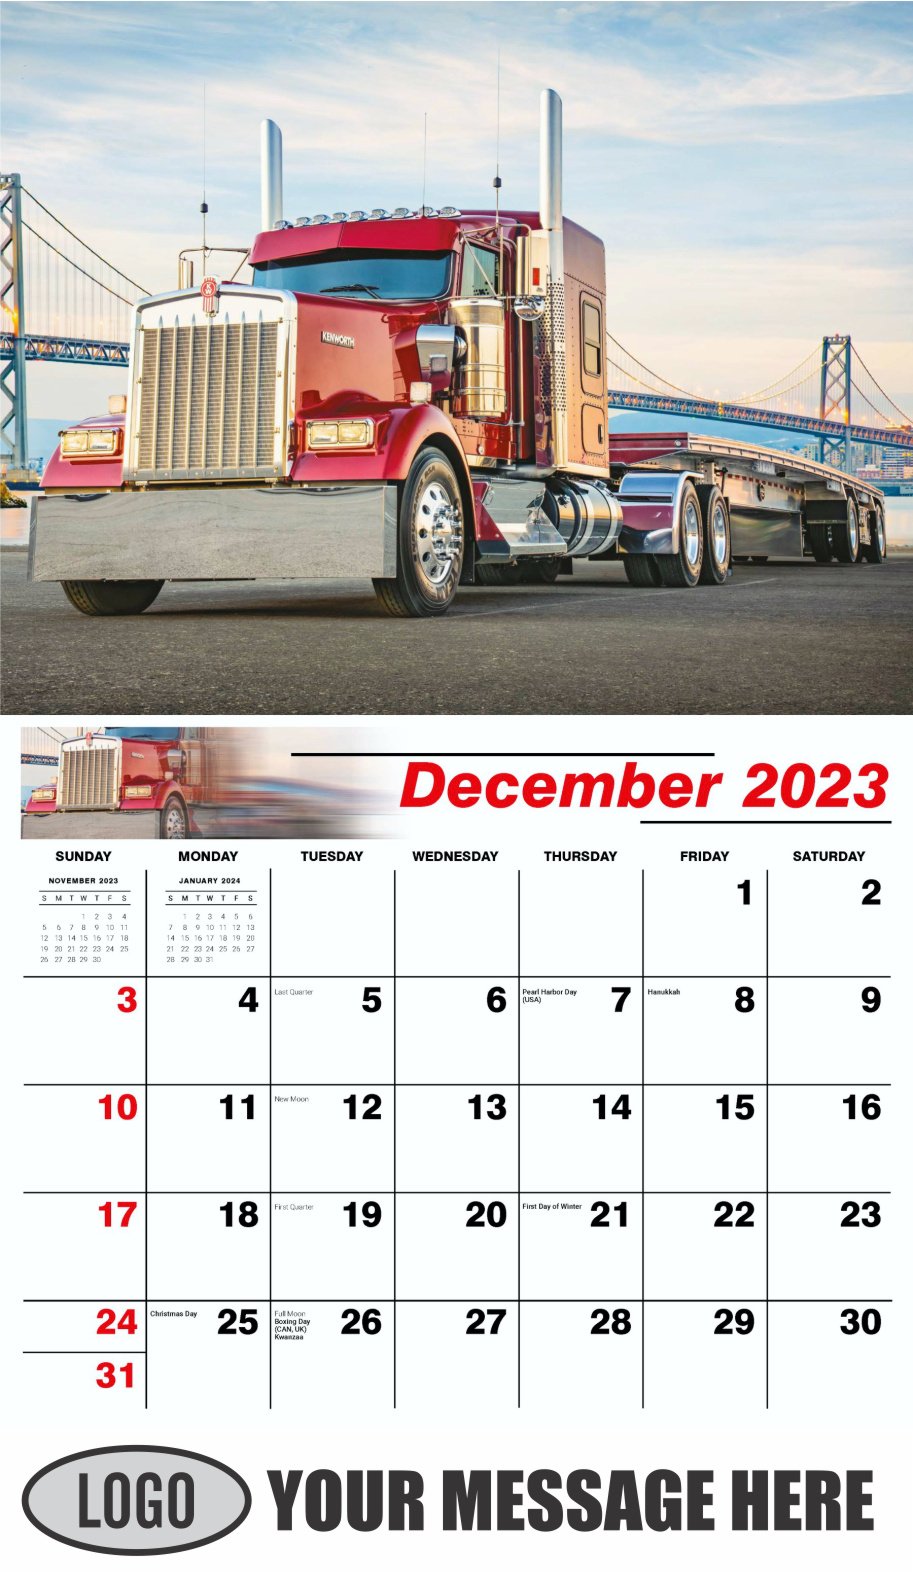 Kings of the Road 2024 Automotive Business Promotional Calendar - December_a